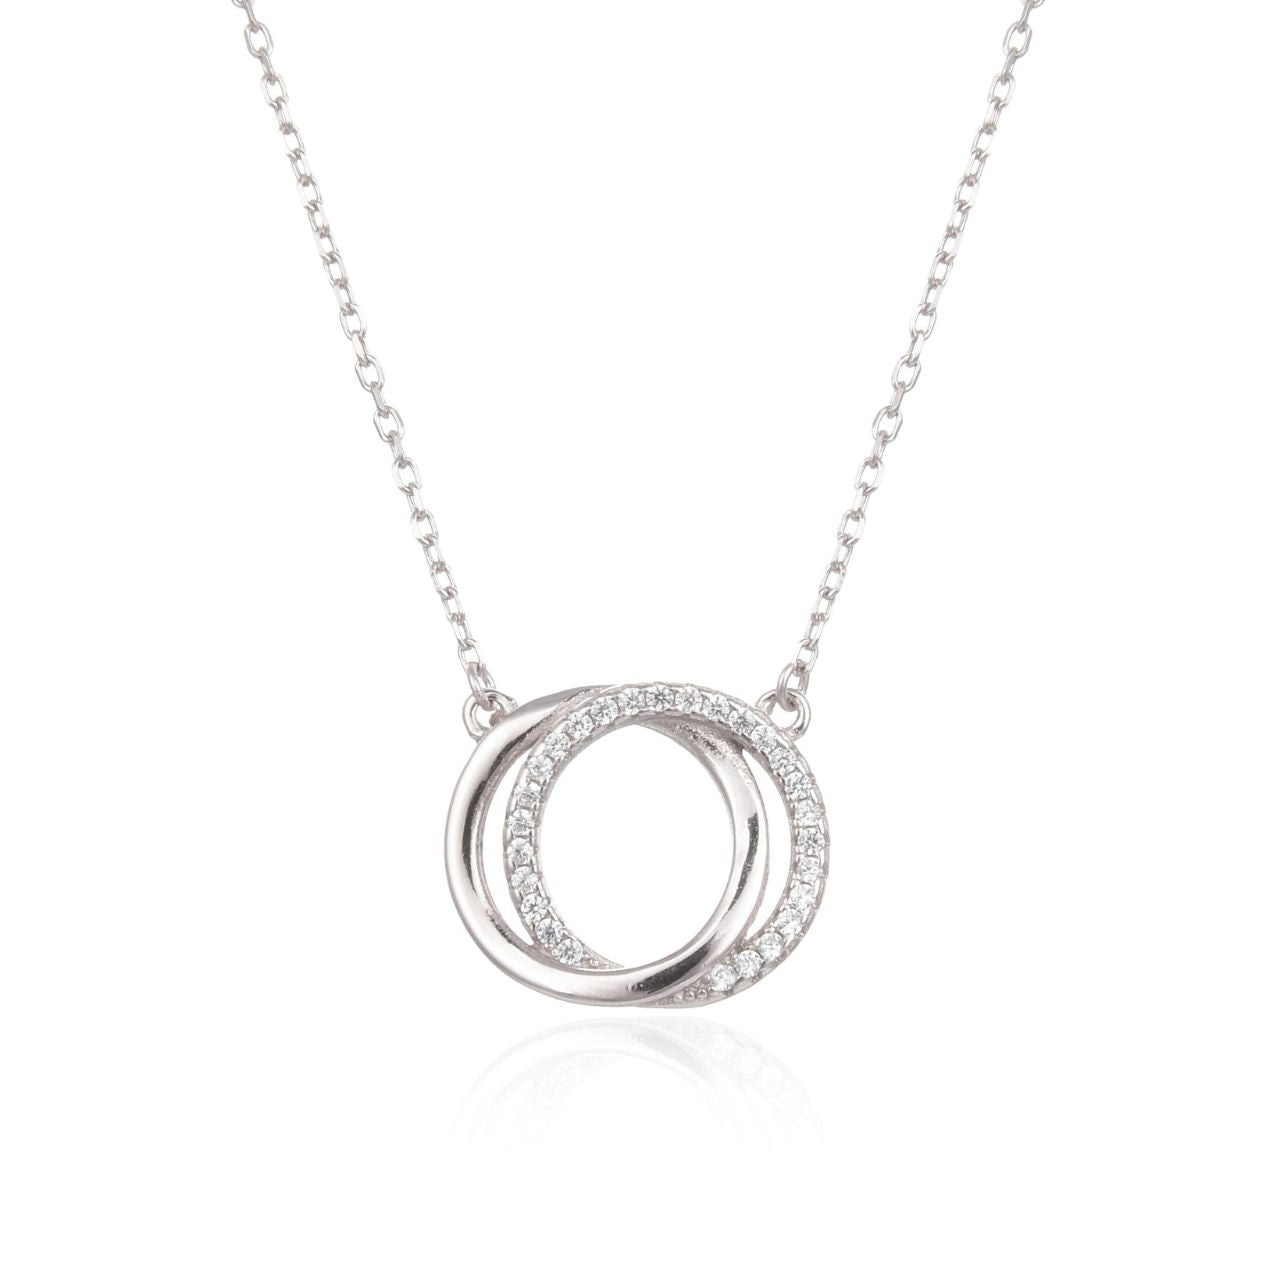 Silver Interlocked Circle Necklace  Sterling silver interlocked circle necklace with cubic zirconia stones.